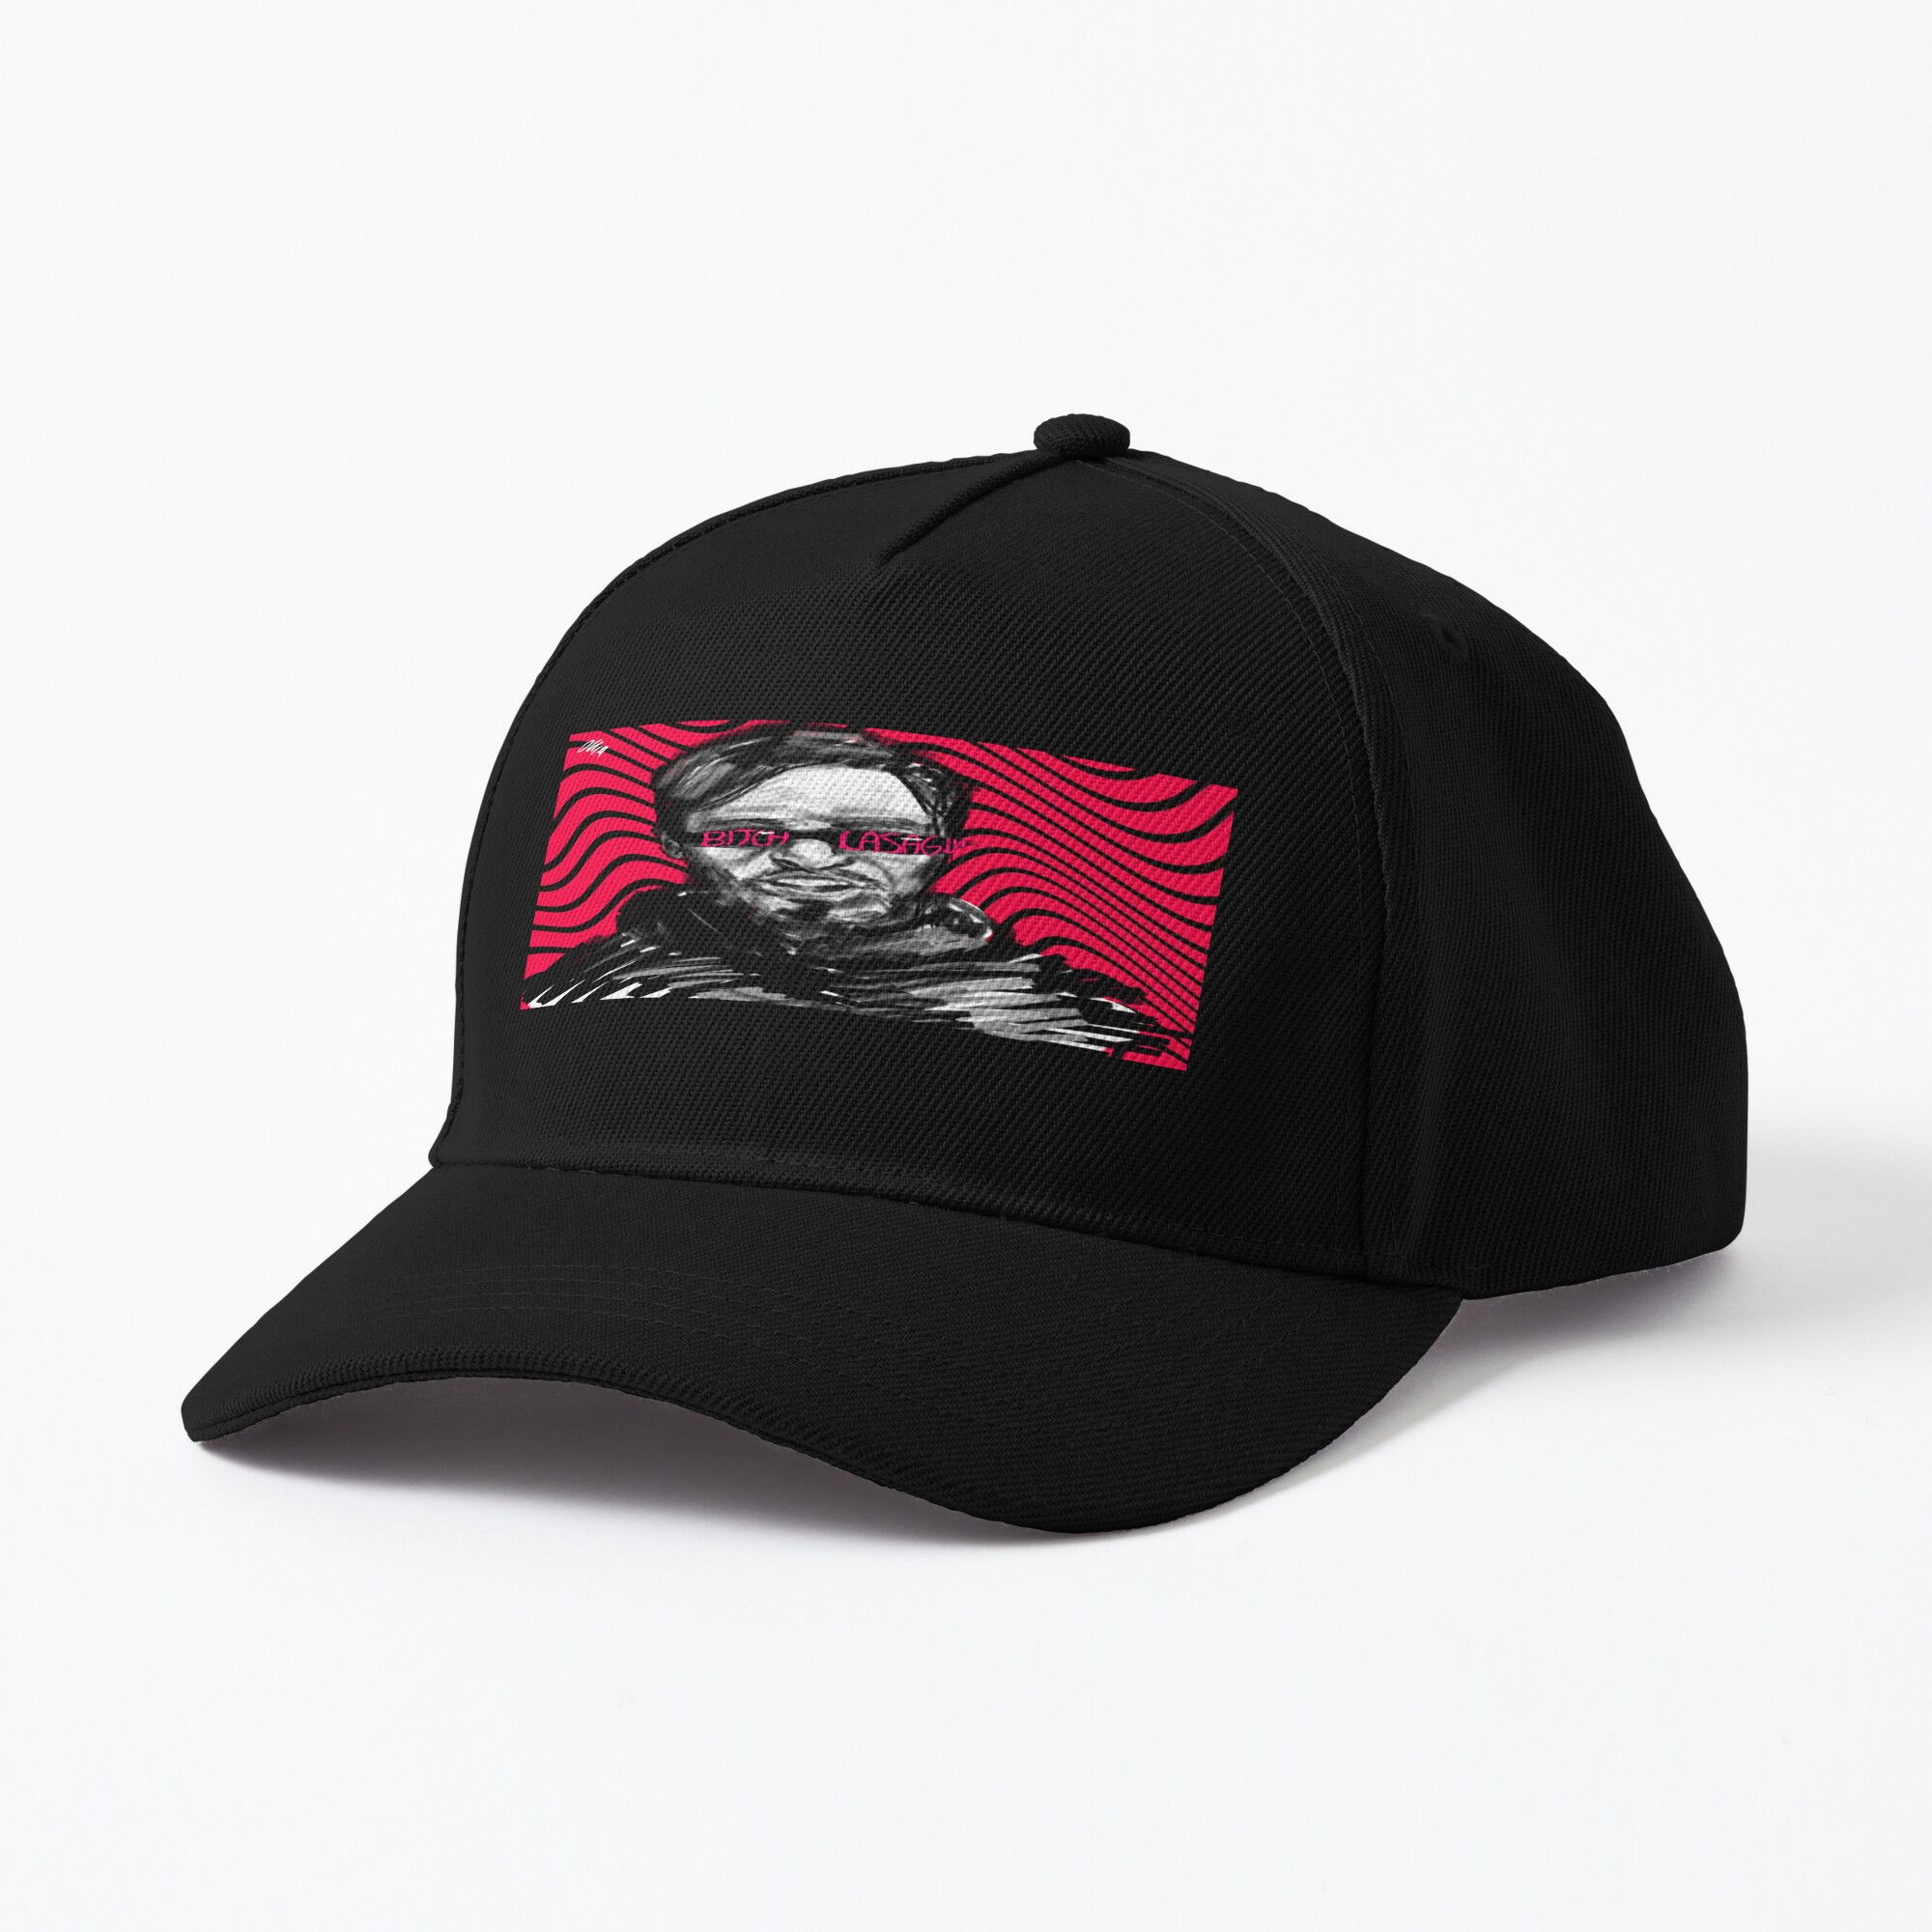 ssrcobaseball capproduct00000044f0b734a5front three quartersquare2000x2000 bgf8f8f8 7 - Pewdiepie Store